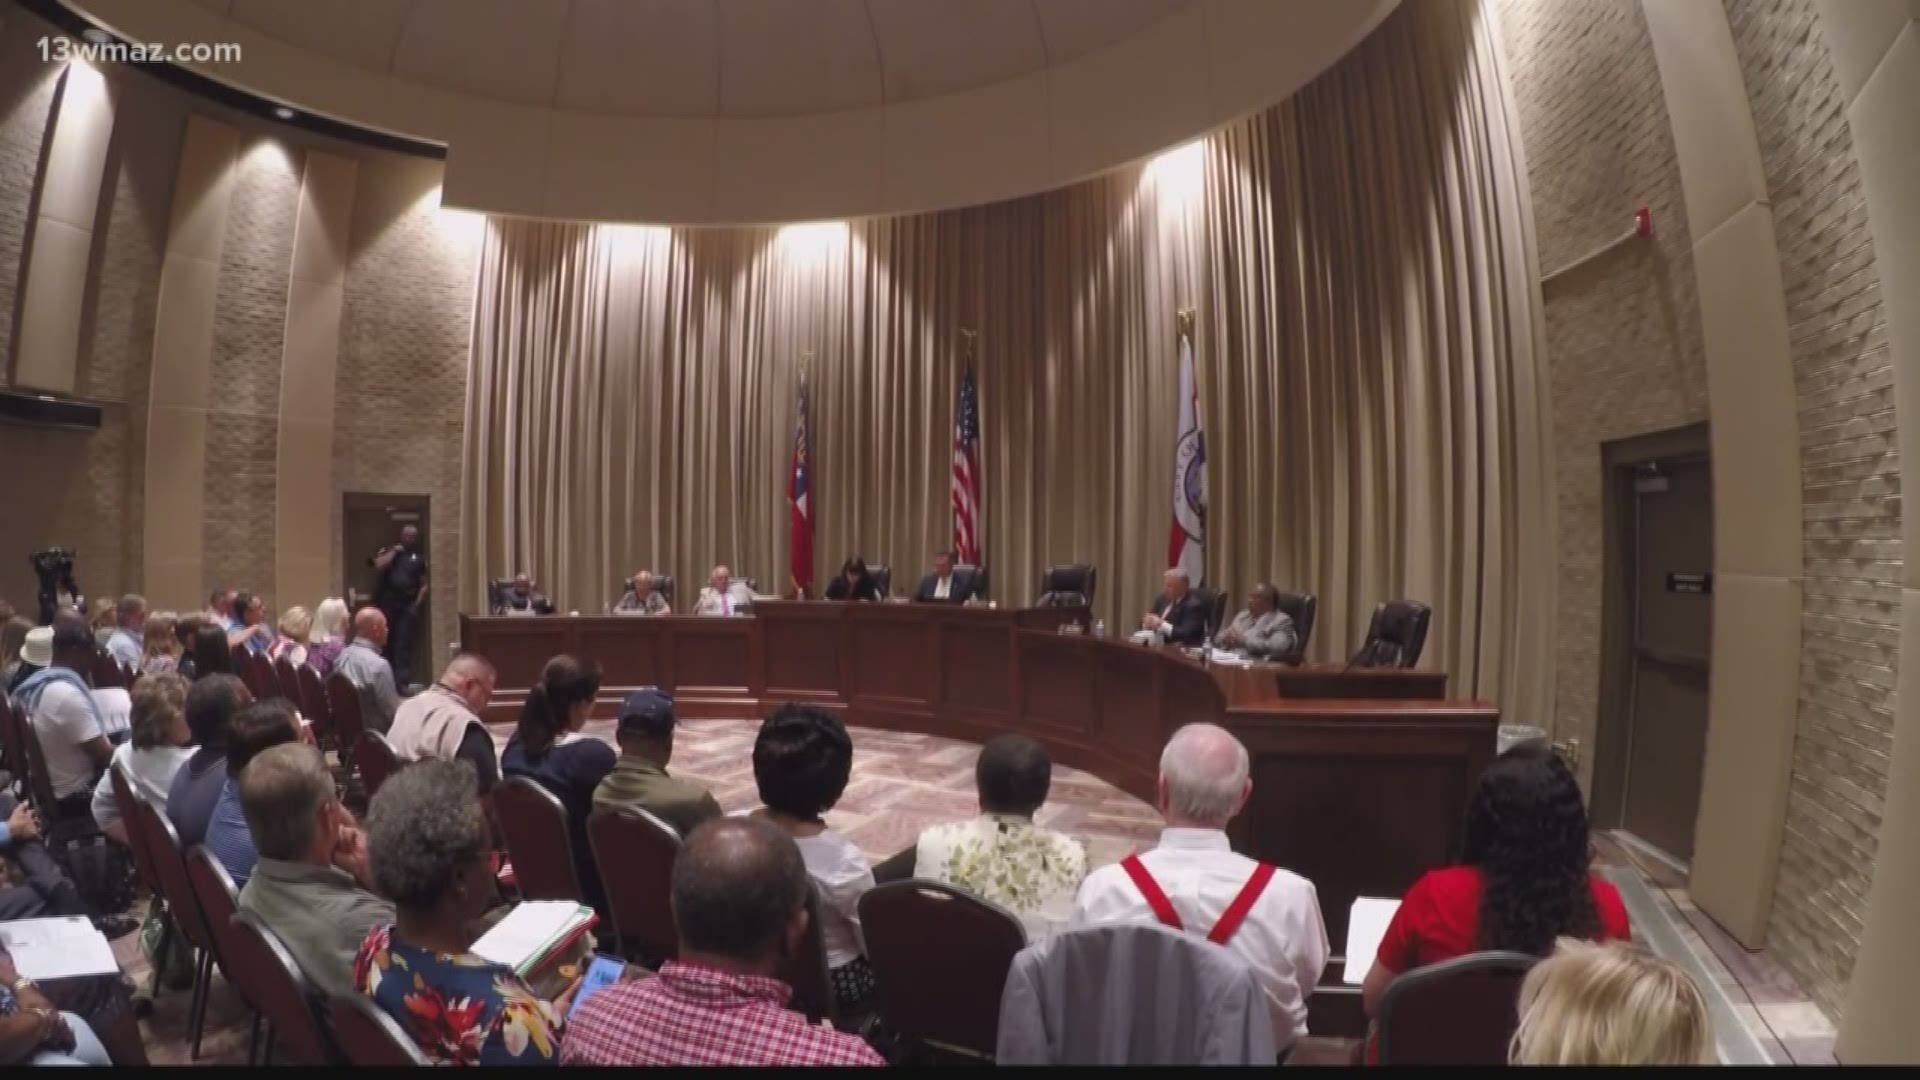 It has been months since councilwoman Carolyn Robbins has attended a Warner Robins city council meeting and some in the international city are starting to ask whether it's time for her to go. So we set out to verify if there even was a method citizens could use to remove an elected official from office for a long string of absences.